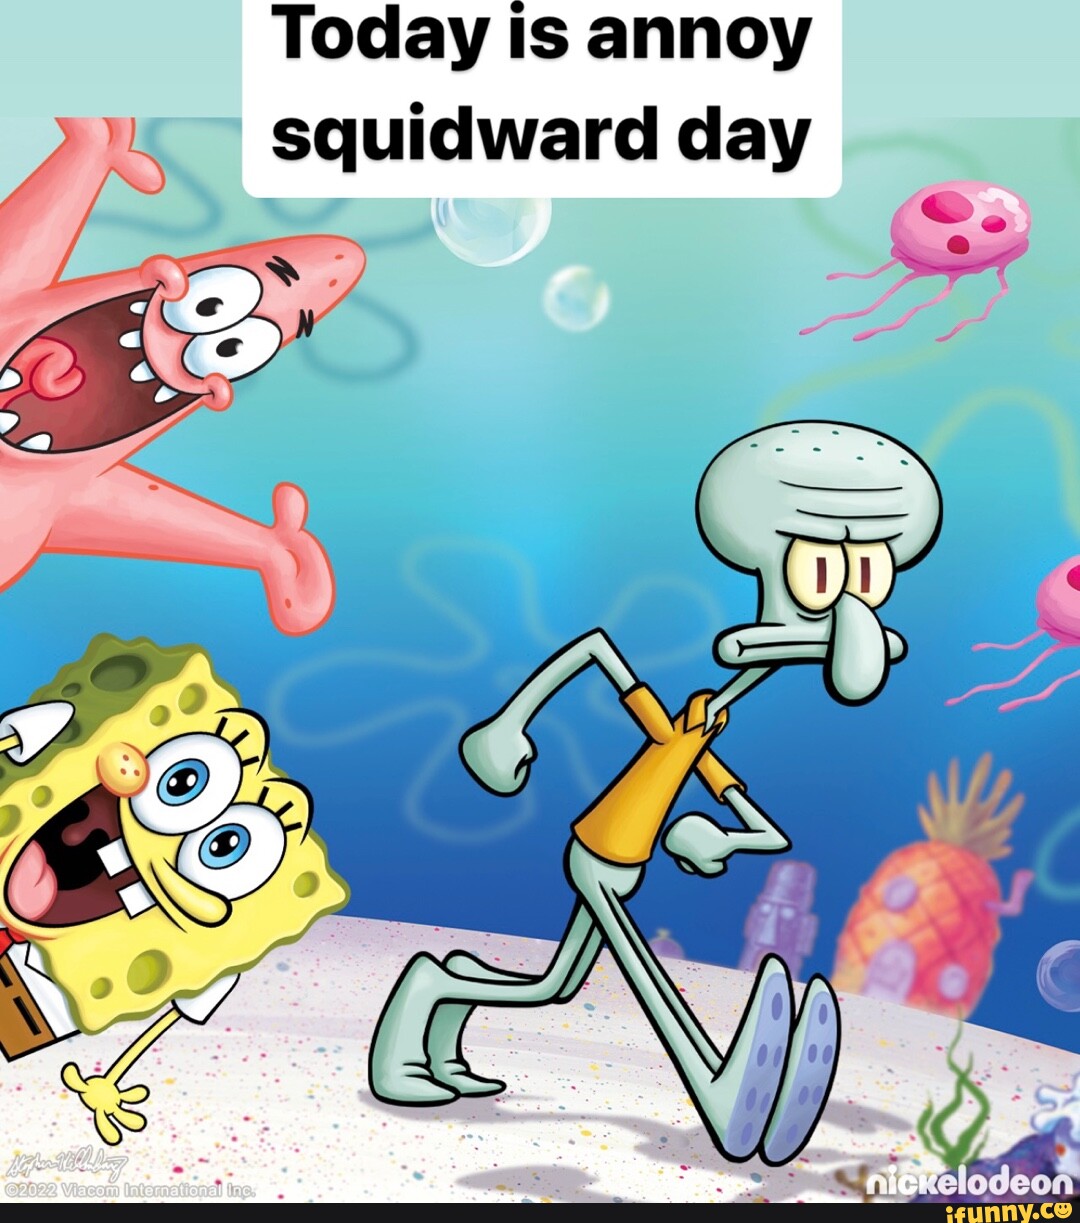 Today Is annoy squidward day seo.title